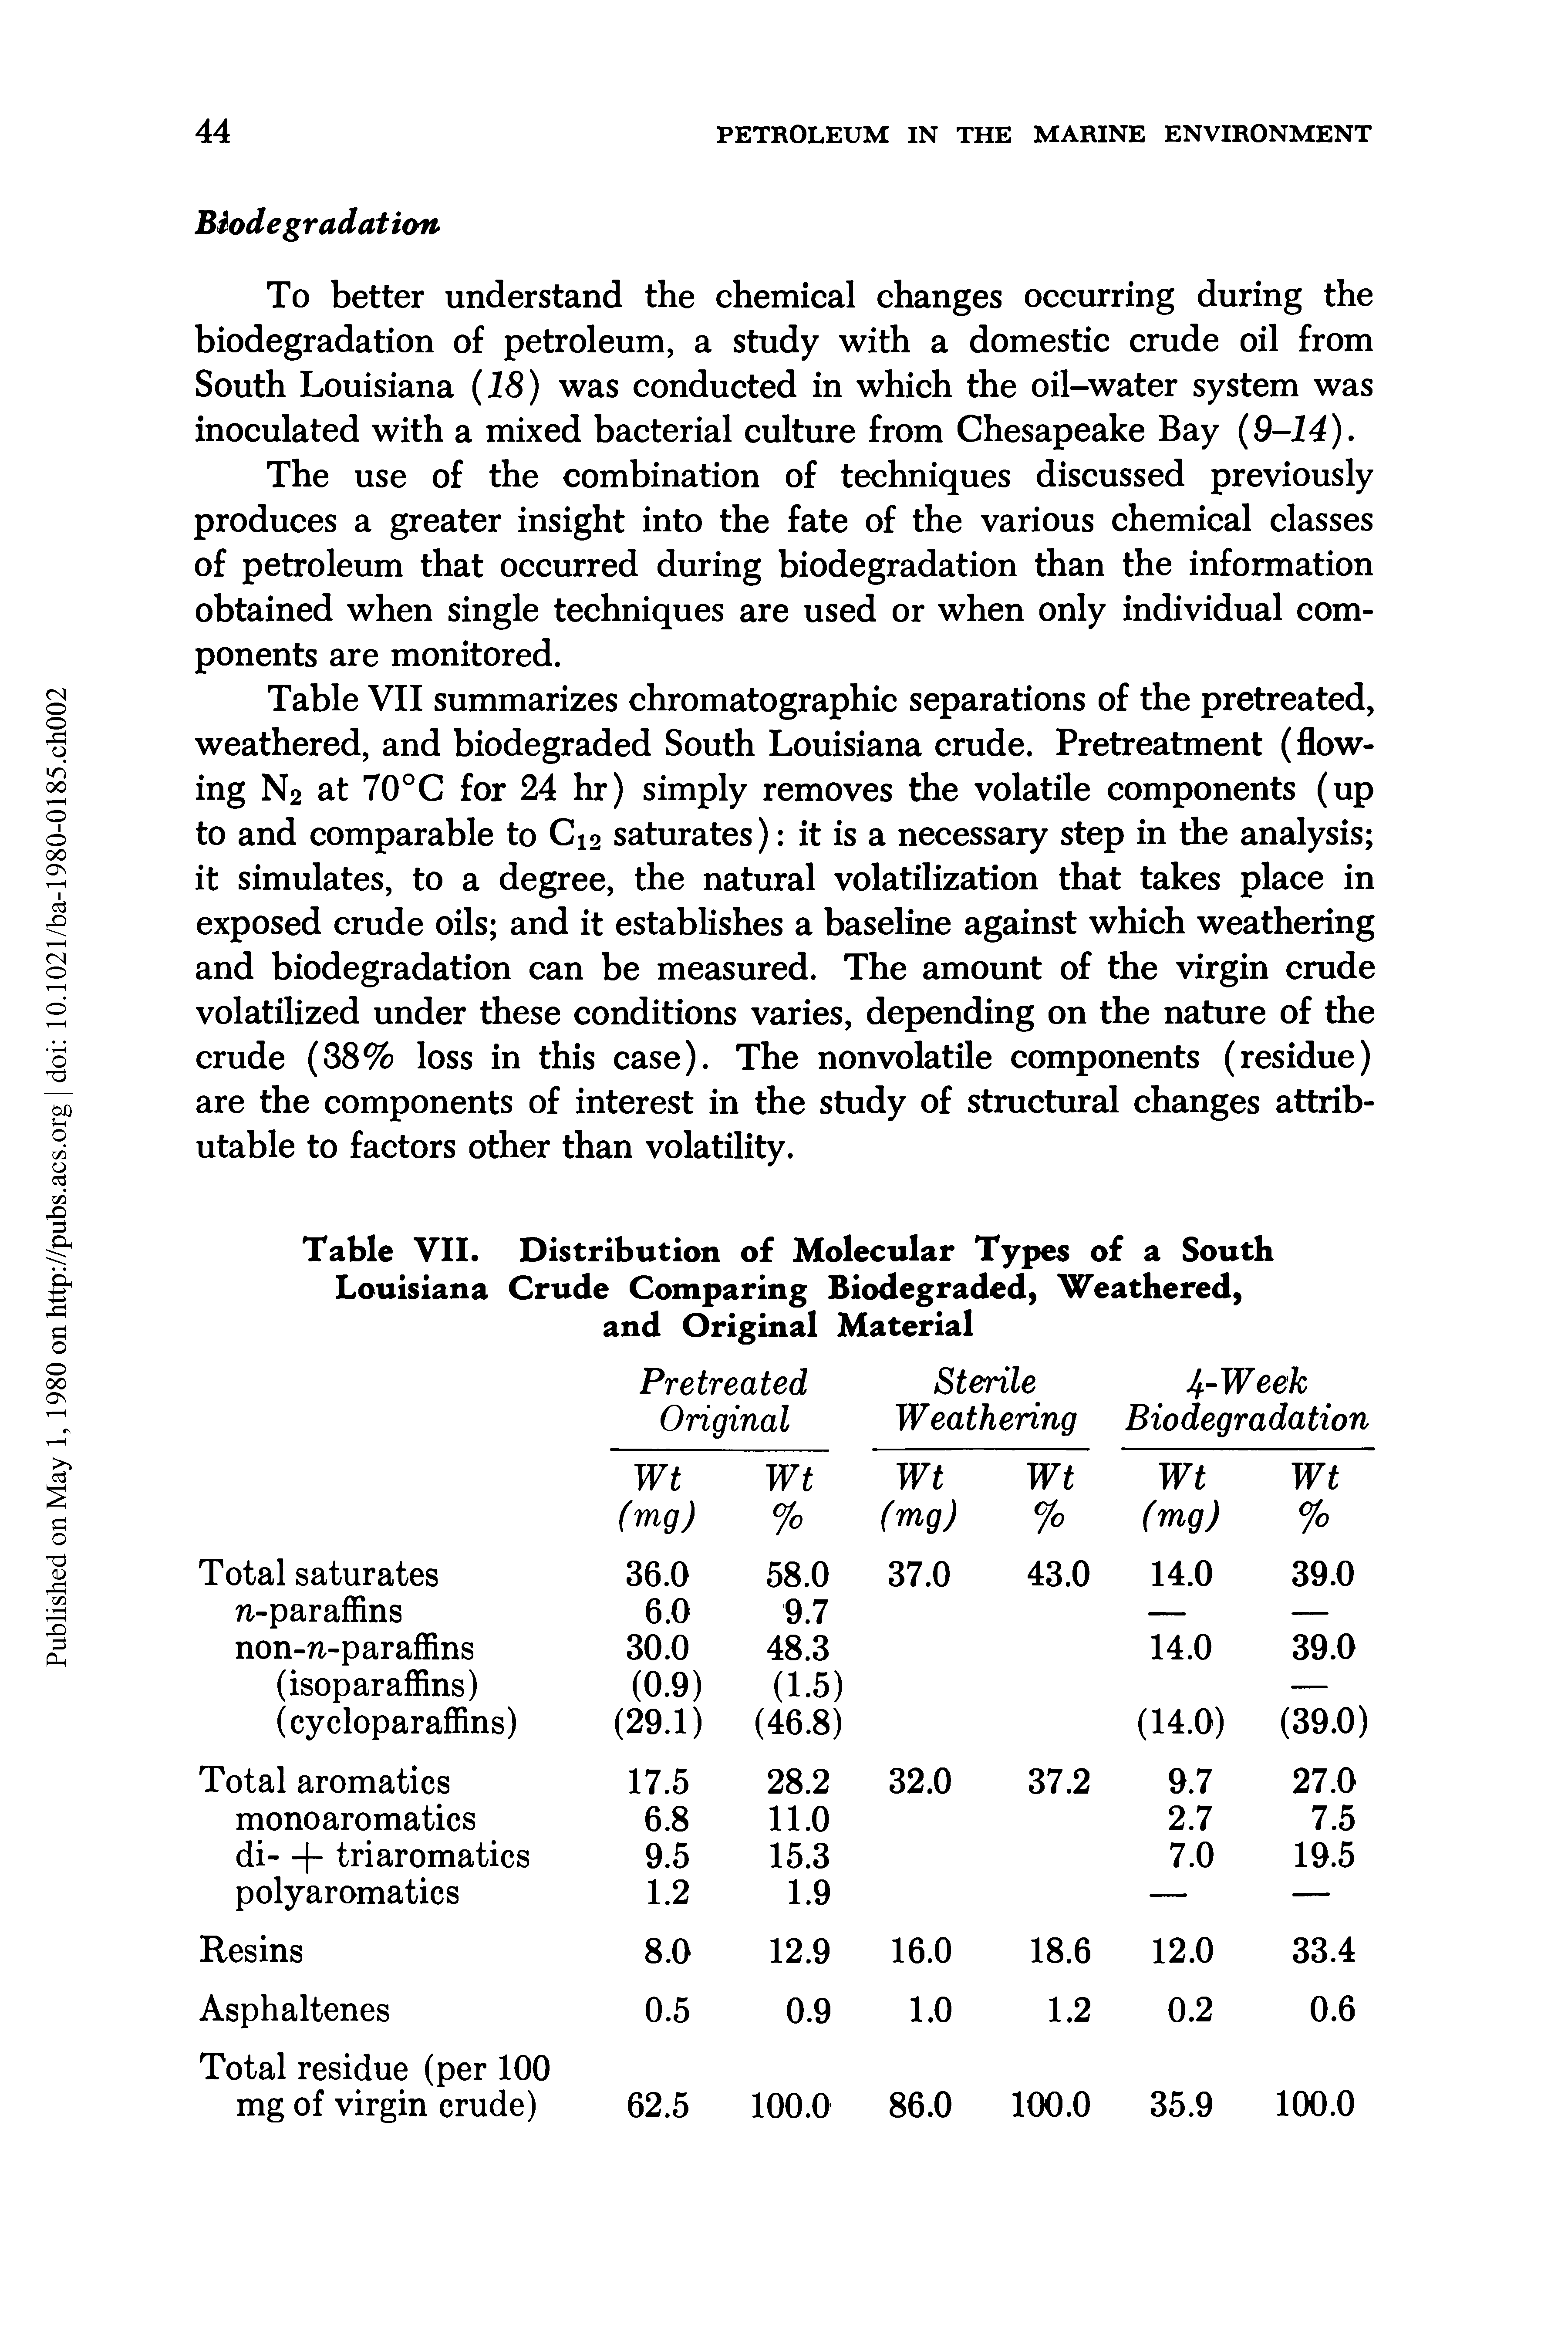 Table VII summarizes chromatographic separations of the pretreated, weathered, and biodegraded South Louisiana crude. Pretreatment (flowing N2 at 70°C for 24 hr) simply removes the volatile components (up to and comparable to Ci2 saturates) it is a necessary step in the analysis it simulates, to a degree, the natural volatilization that takes place in exposed crude oils and it establishes a baseline against which weathering and biodegradation can be measured. The amount of the virgin crude volatilized under these conditions varies, depending on the nature of the crude (38% loss in this case). The nonvolatile components (residue) are the components of interest in the study of structural changes attributable to factors other than volatility.